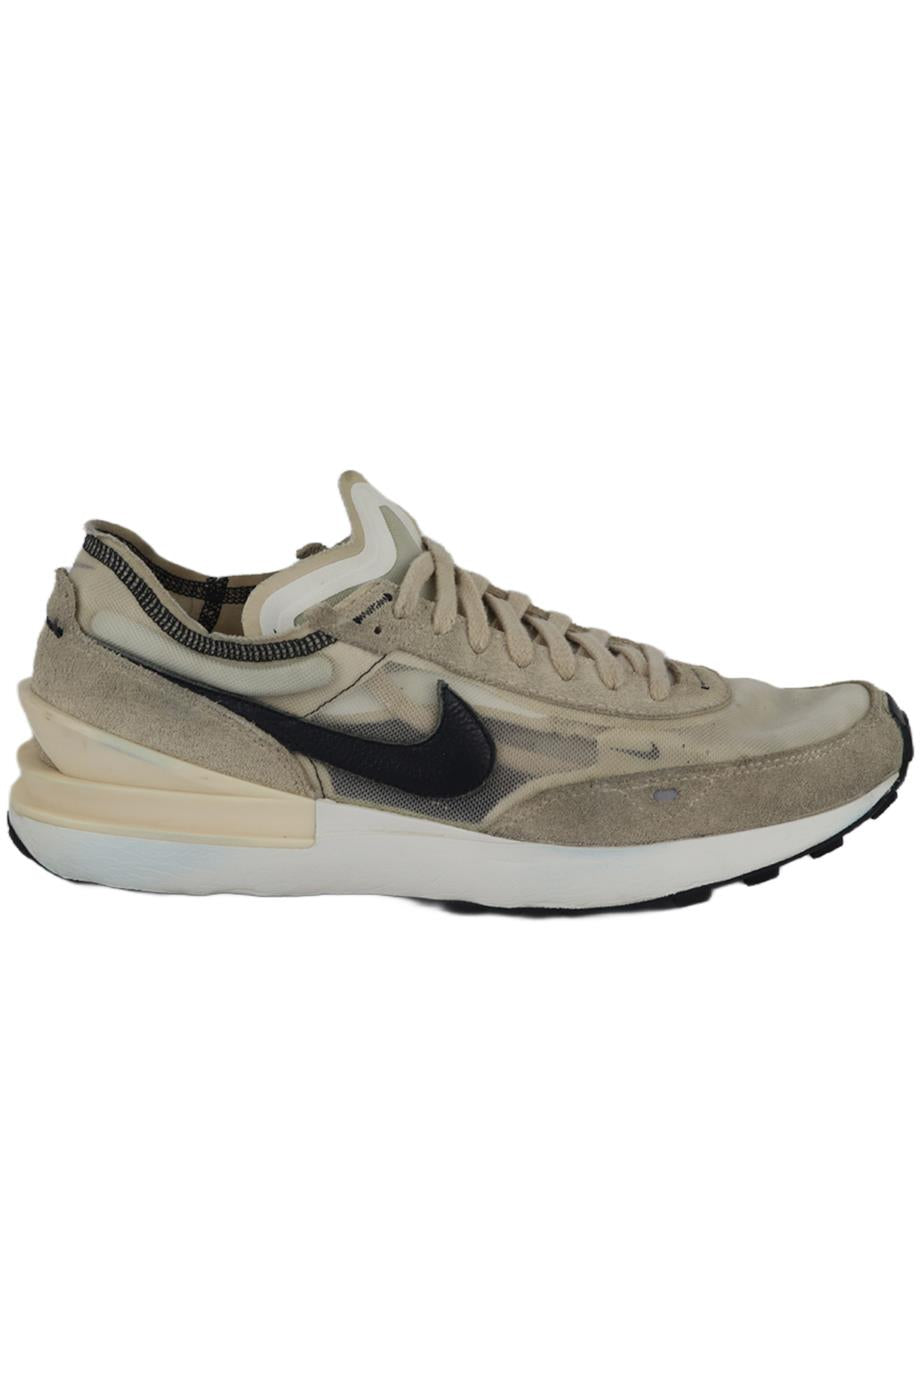 NIKE MEN'S WAFFLE ONE SUEDE LEATHER TRIMMED MESH SNEAKERS EU 47.5 UK 12 US 13